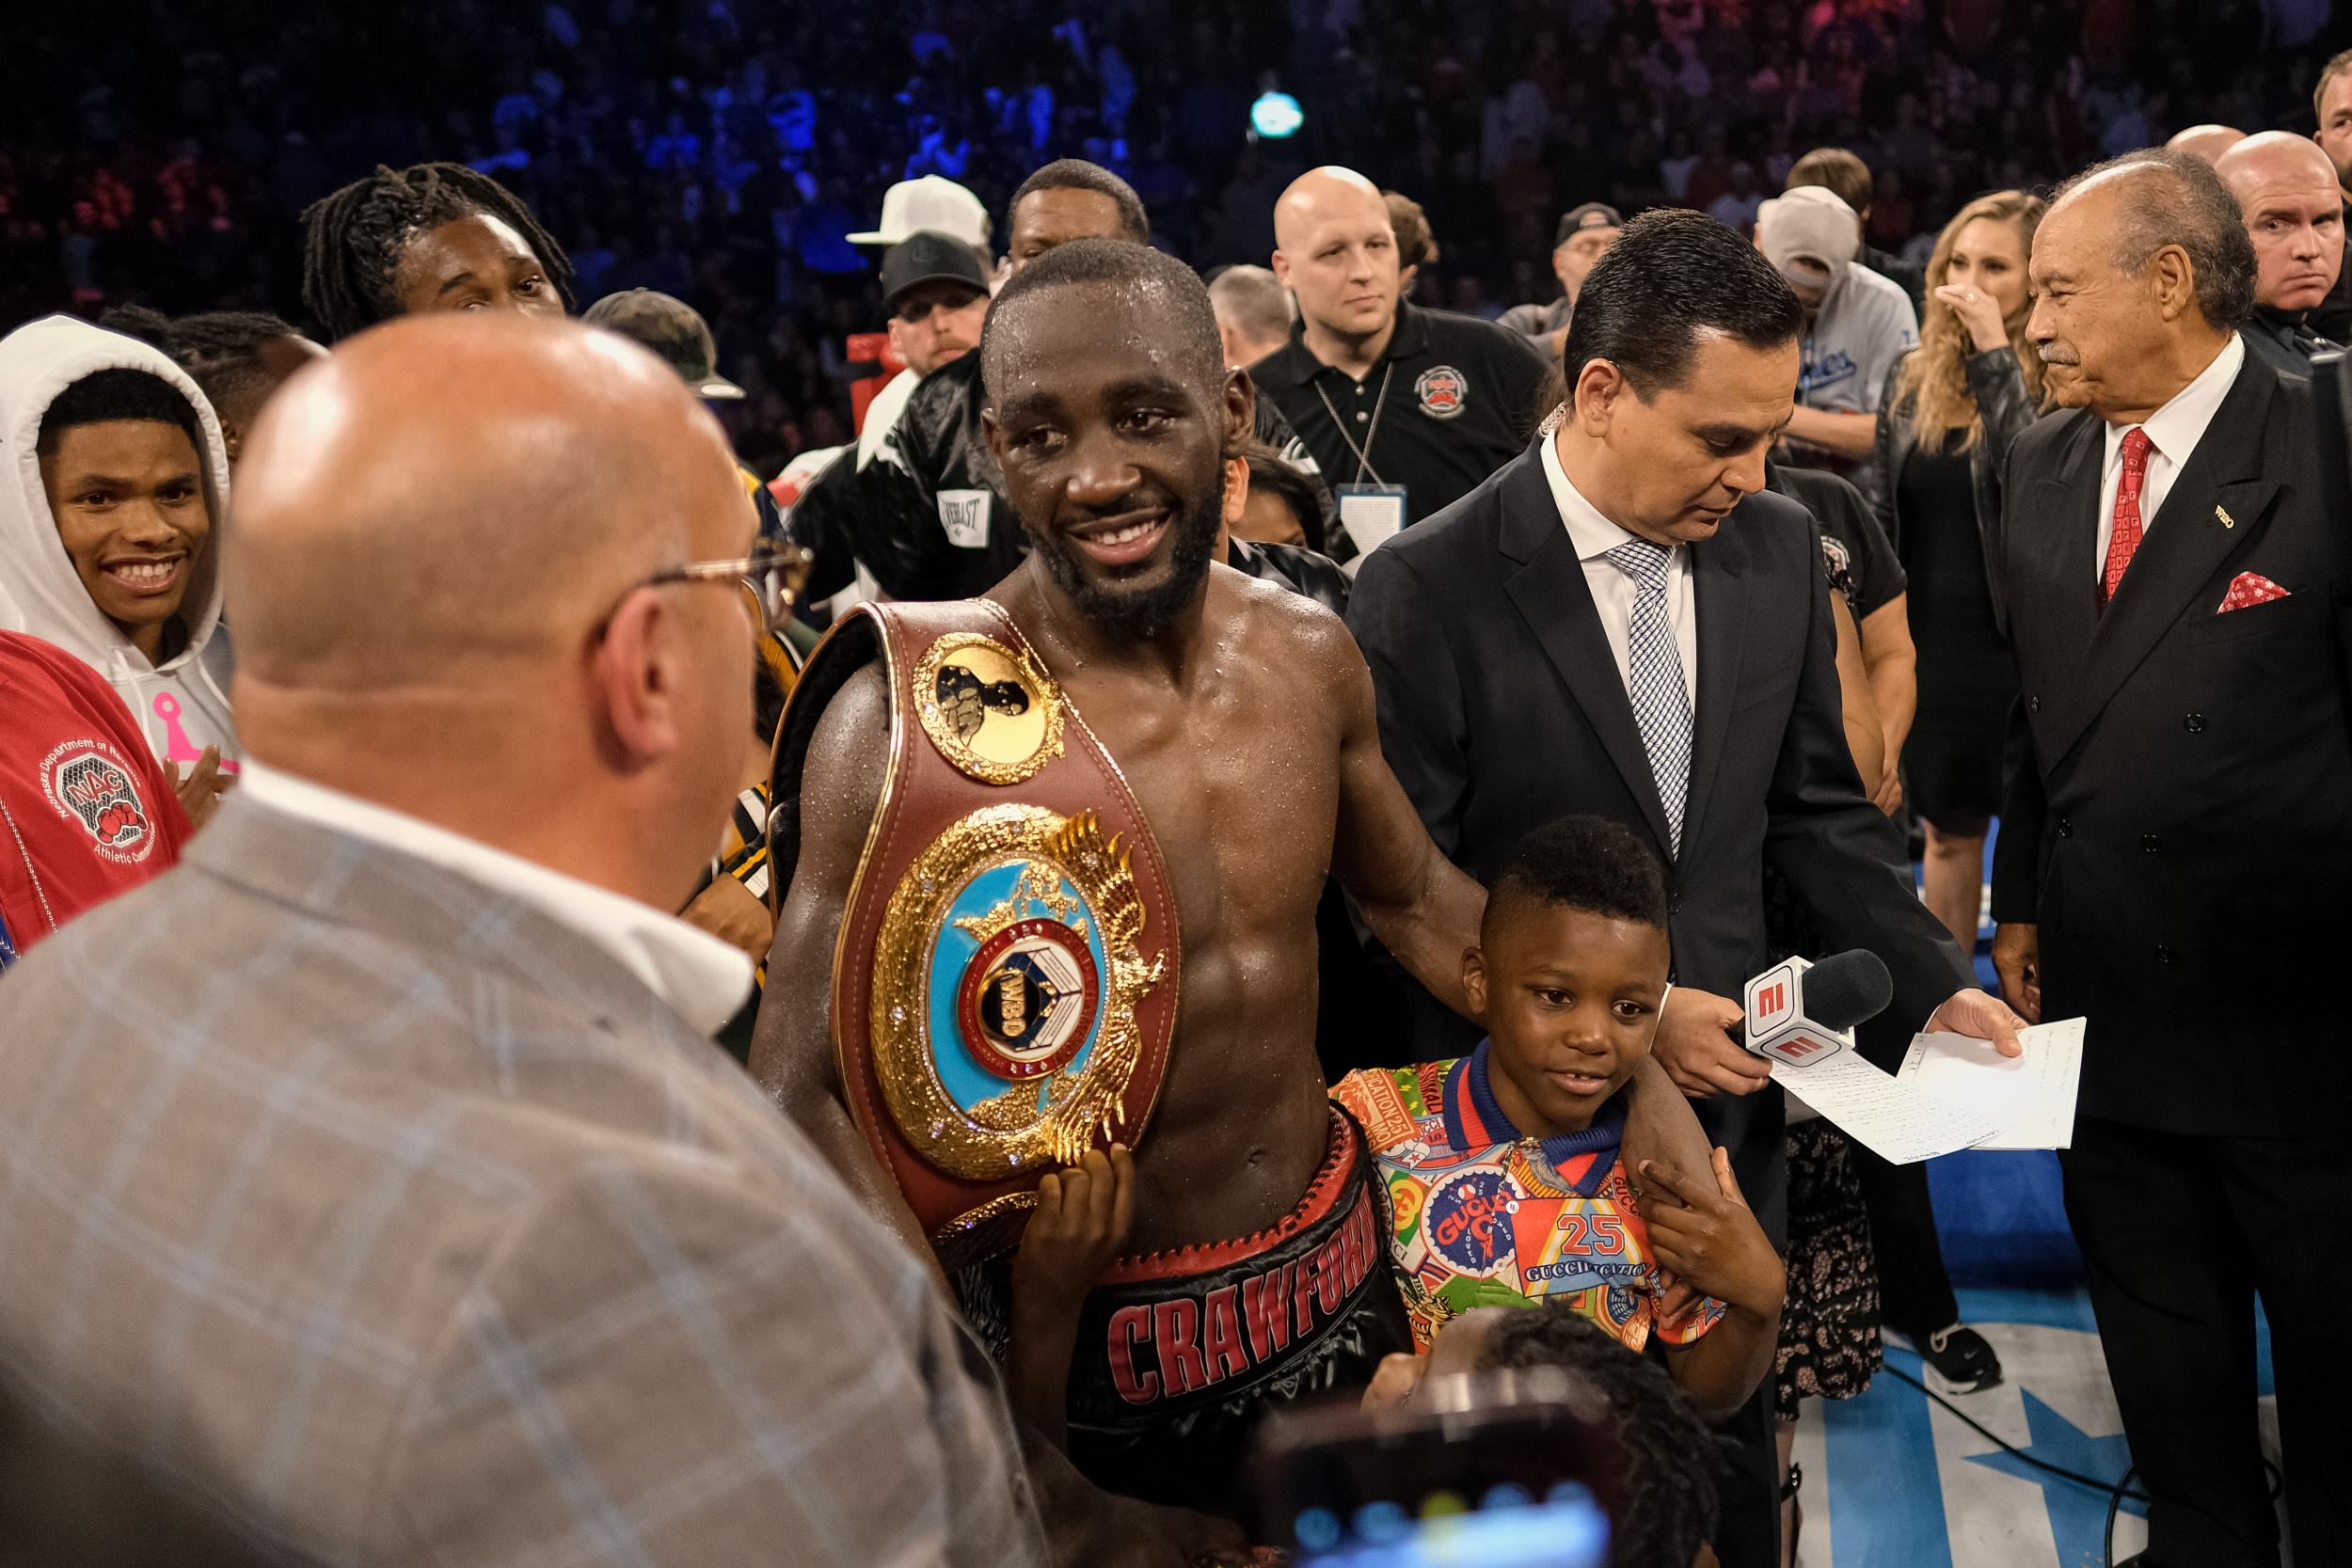 Crawford defended his WBO title in October with a TKO win